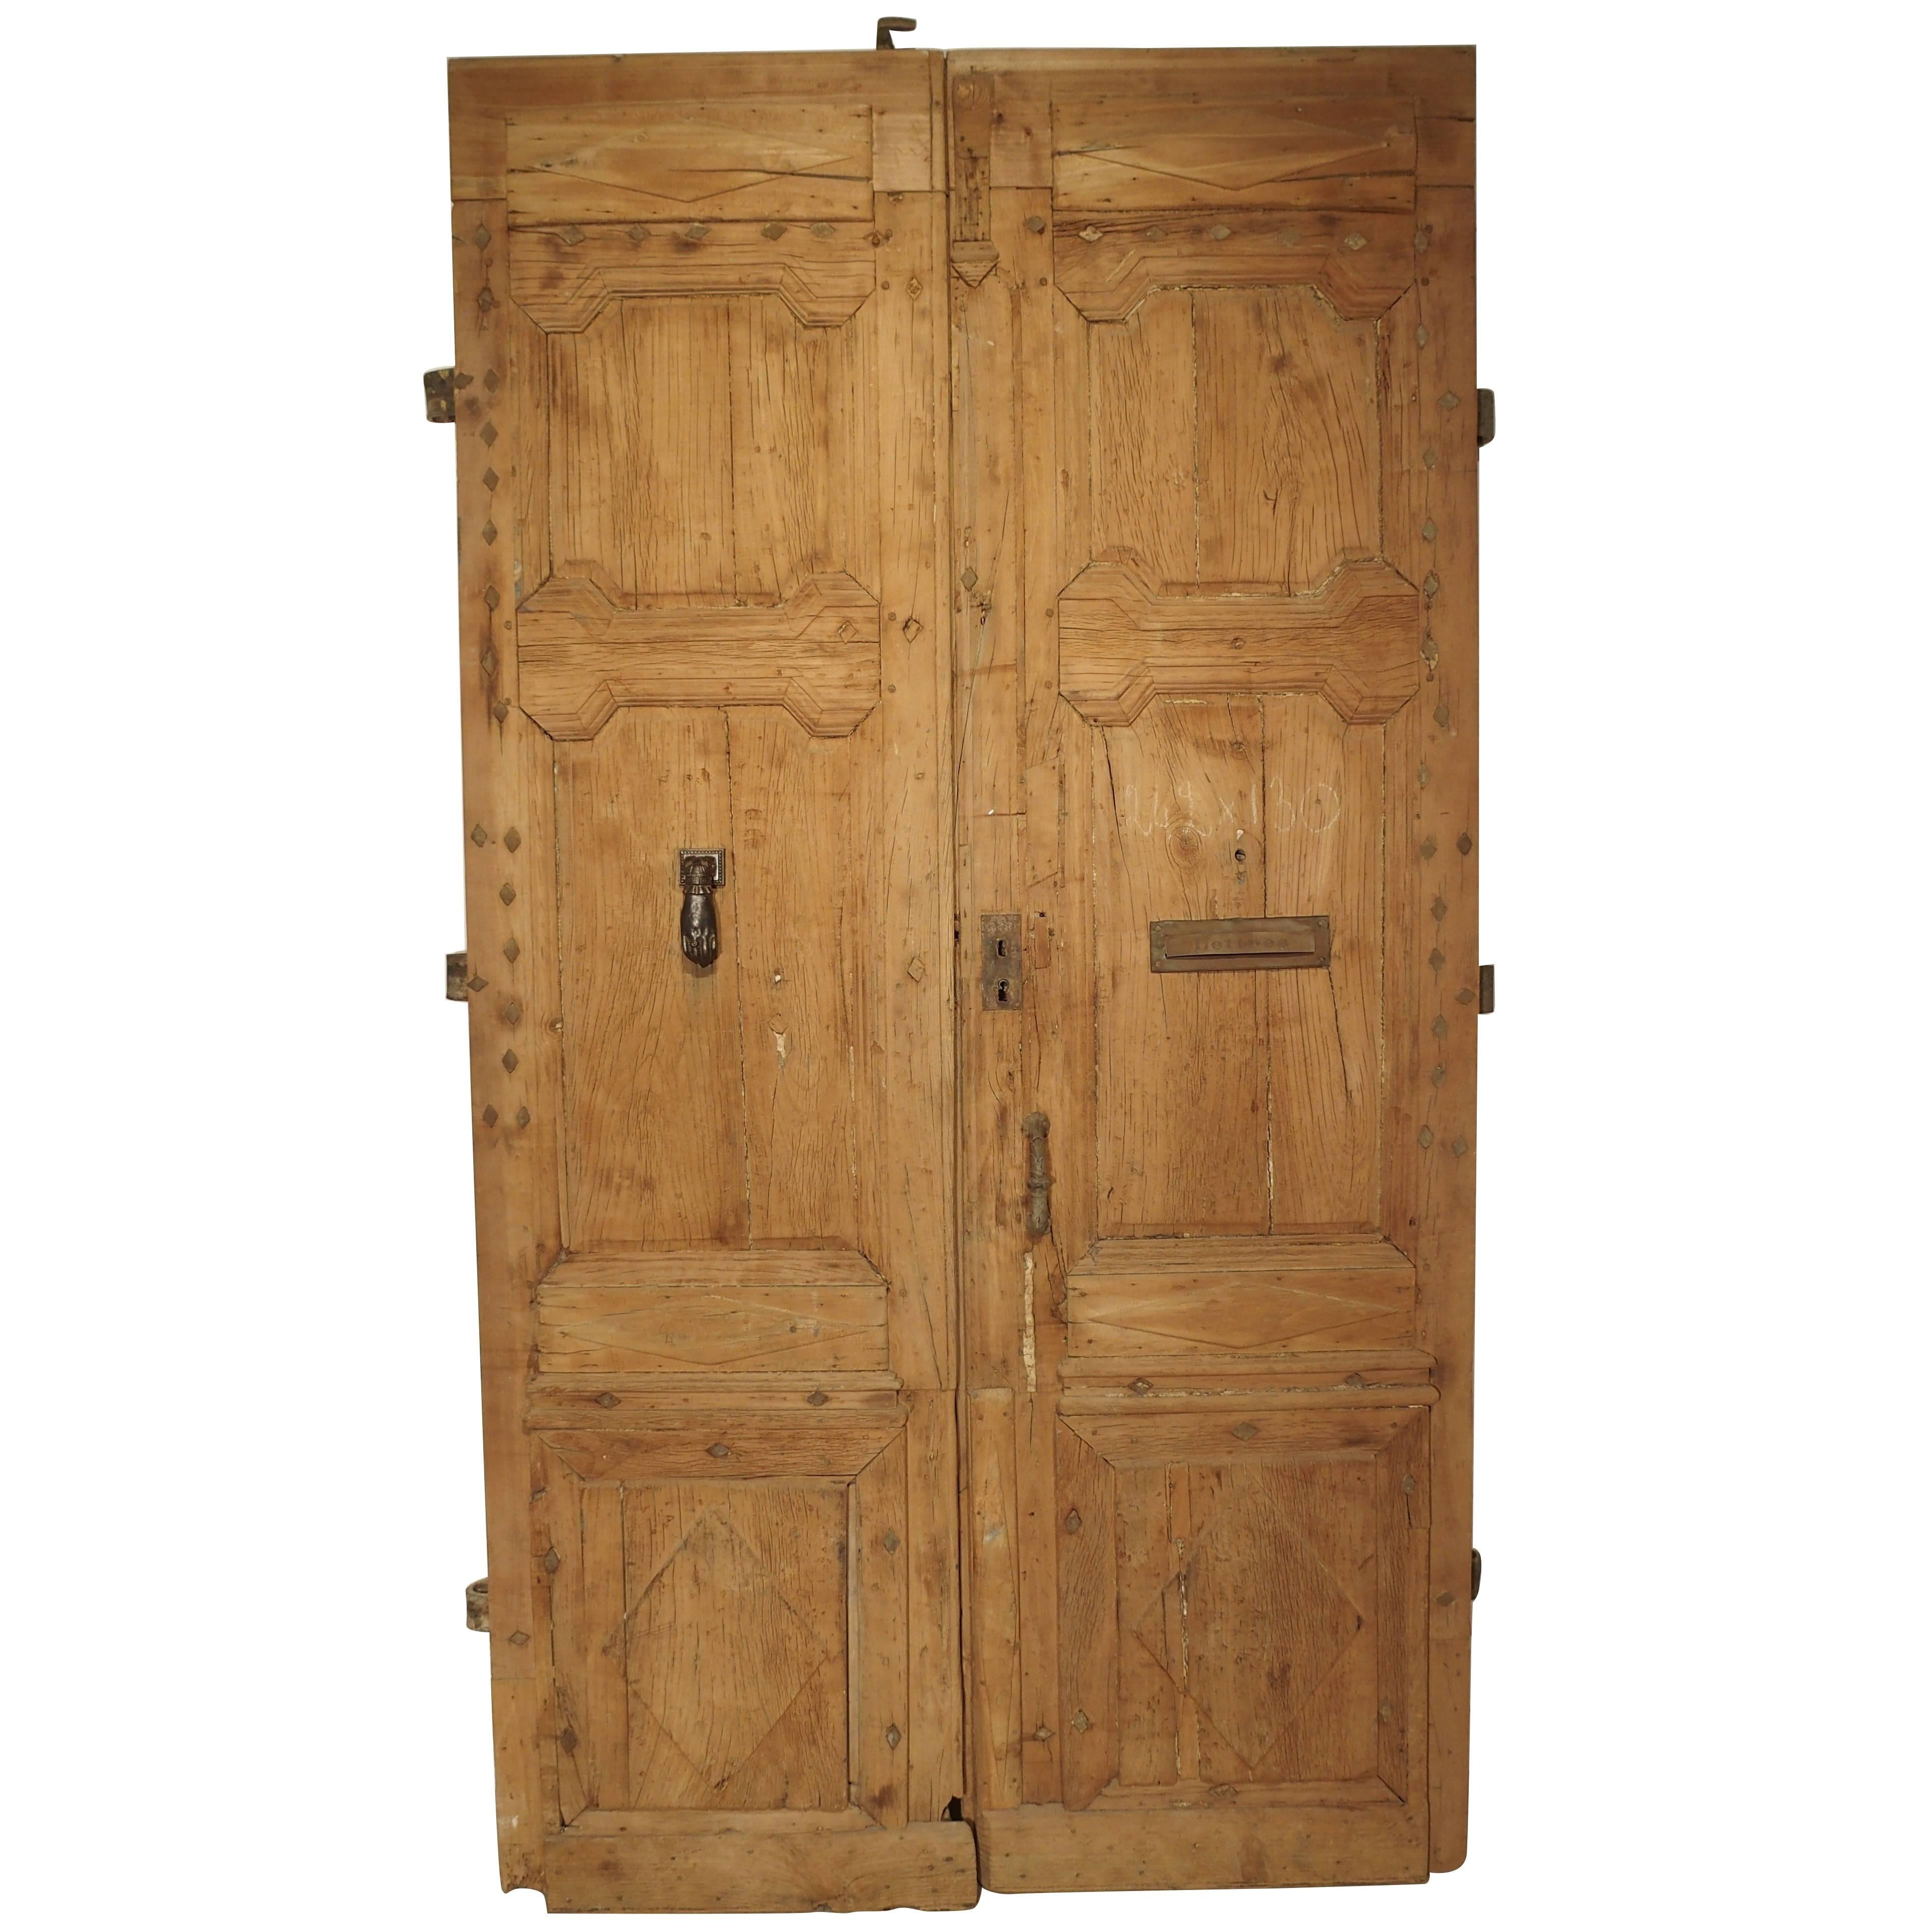 Pair of Period Directoire Doors from France, Oak and Iron, Circa 1800